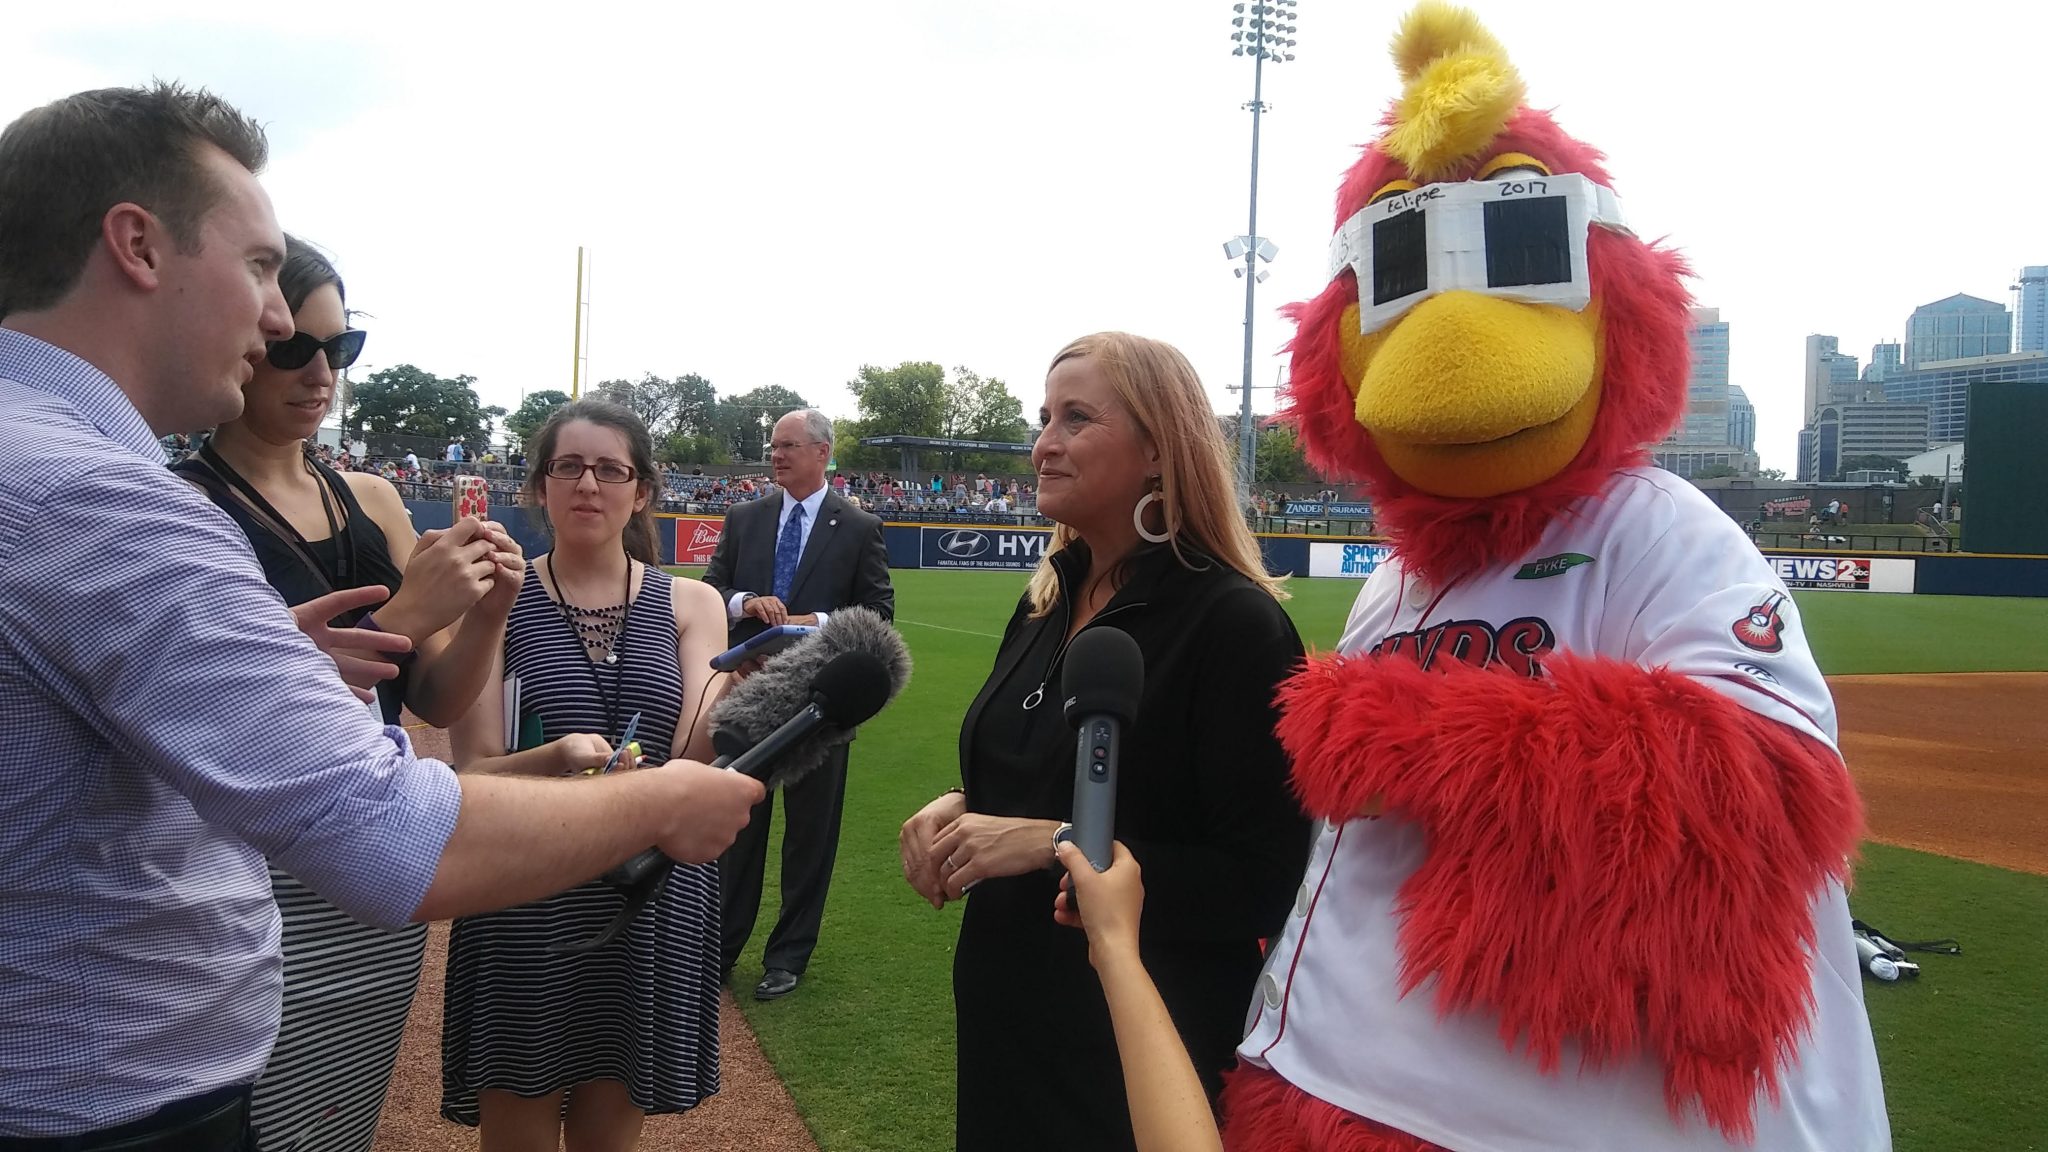 Nashville Mayor Megan Barry and Booster the Hot Chicken